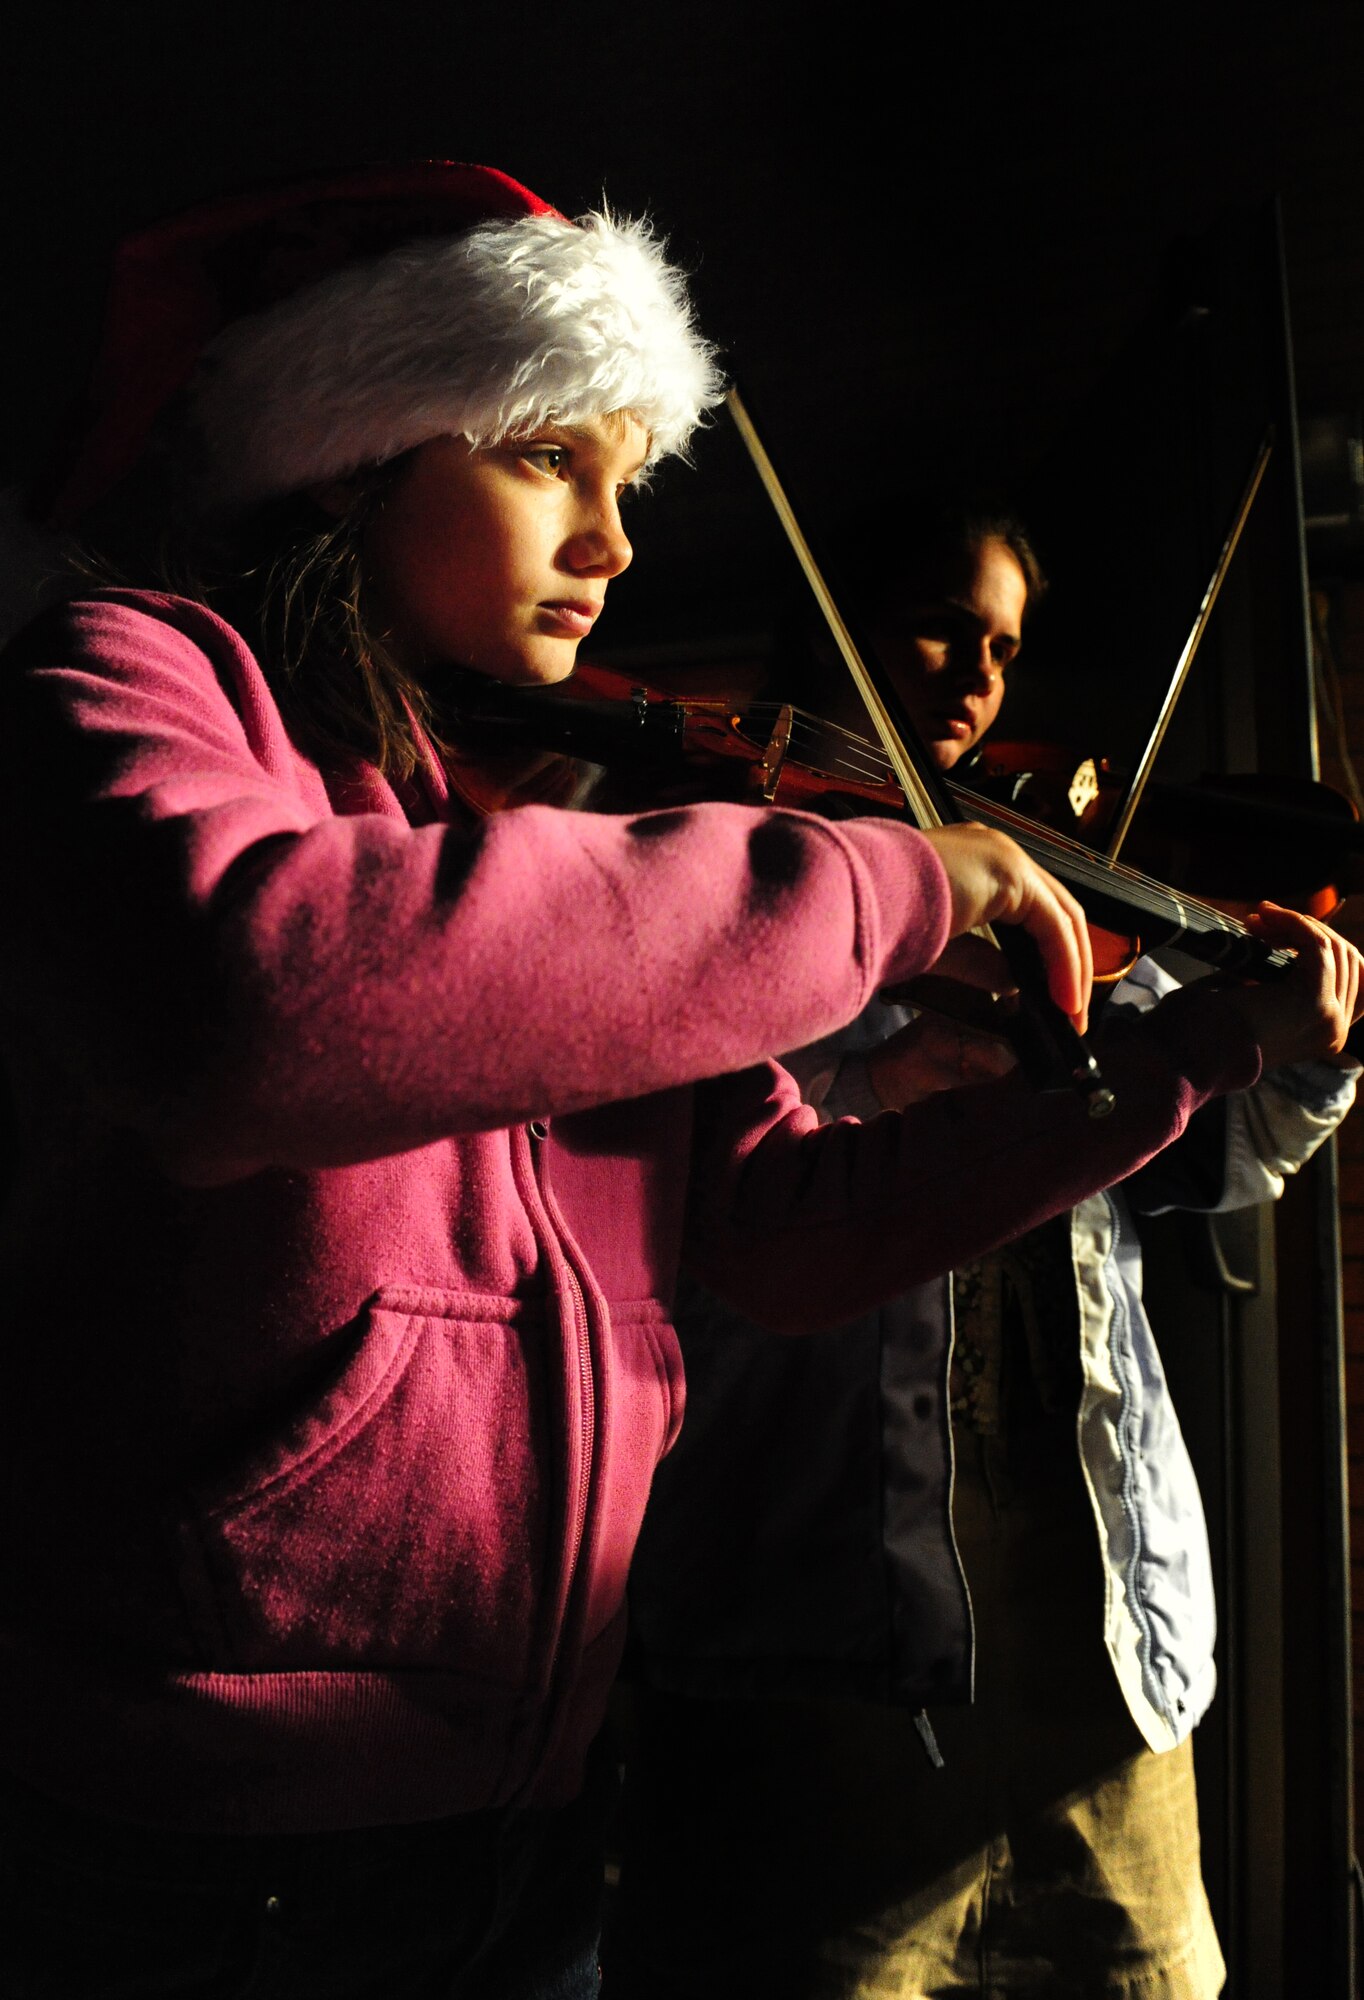 HOLLOMAN AIR FORCE BASE, N.M. -- Kayla Ross, 11, plays her violin during a tree and menorah lighting ceremony held at the base Chapel Dec. 7. The age-old tradition of lighting the tree and menorah symbolizes the start of the holiday season. (U.S. Air Force photo by Senior Airman Tiffany Trojca)